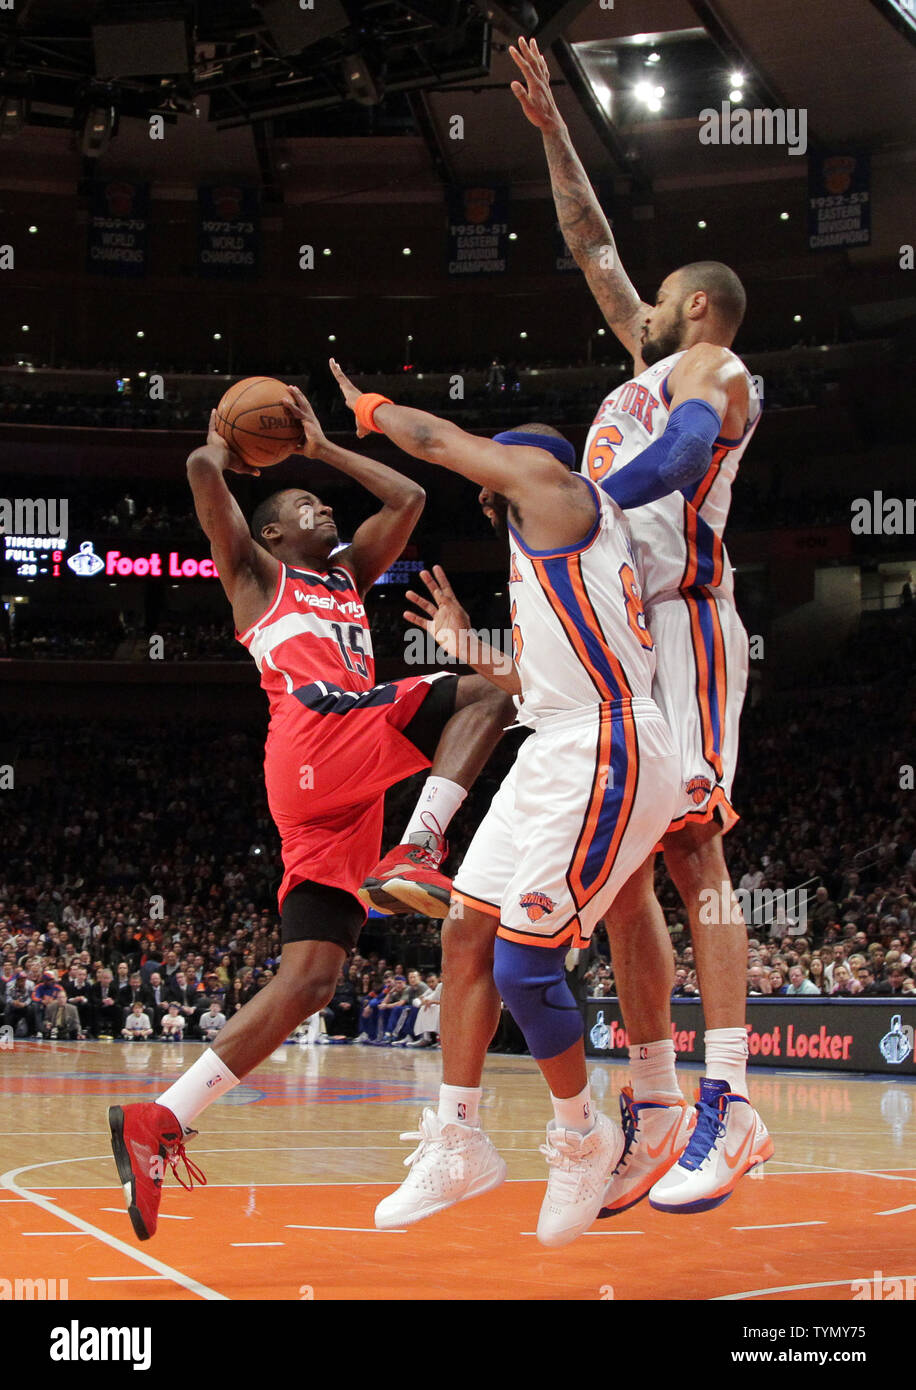 New York Knicks Tyson Chandler and Baron Davis try to block a shot from Washington Wizards Jordan Crawford in the first quarter at Madison Square Garden in New York City on April 13, 2012.  UPI/John Angelillo Stock Photo